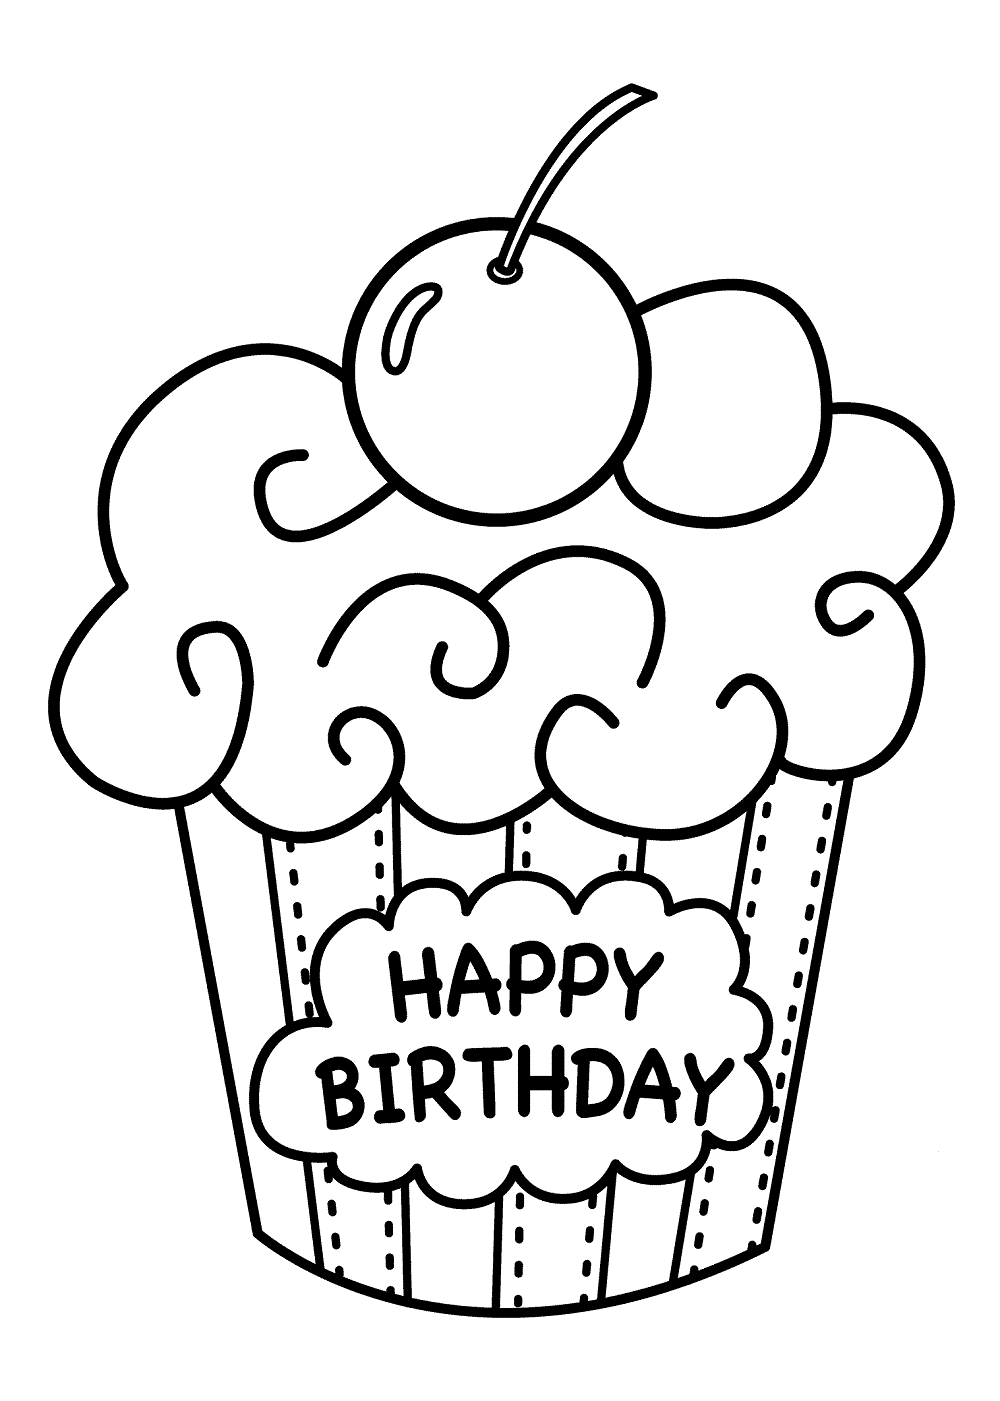 Birthday cake coloring pages free happy birthday coloring pages birthday coloring pages cupcake coloring pages